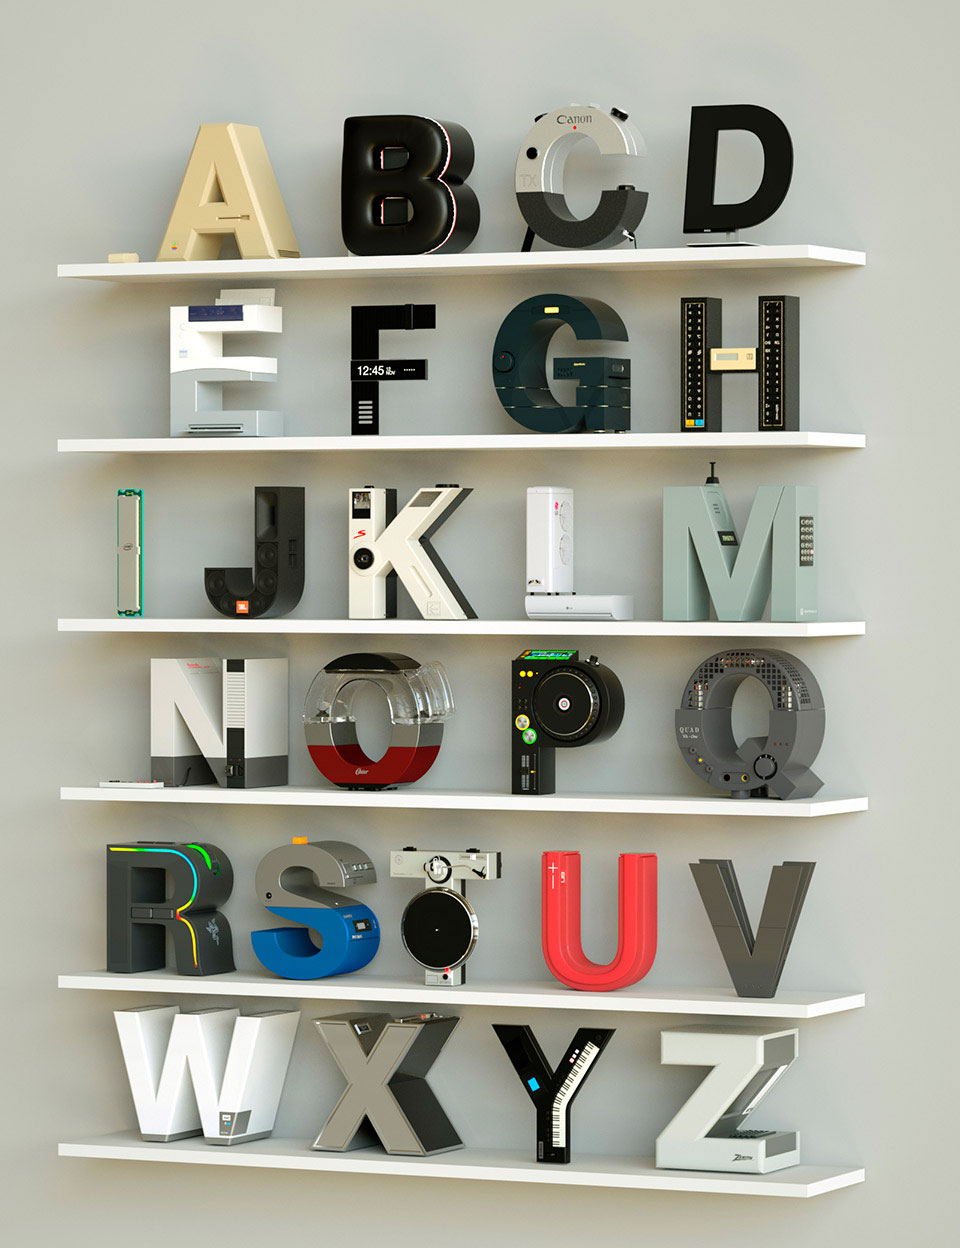 Brands as type